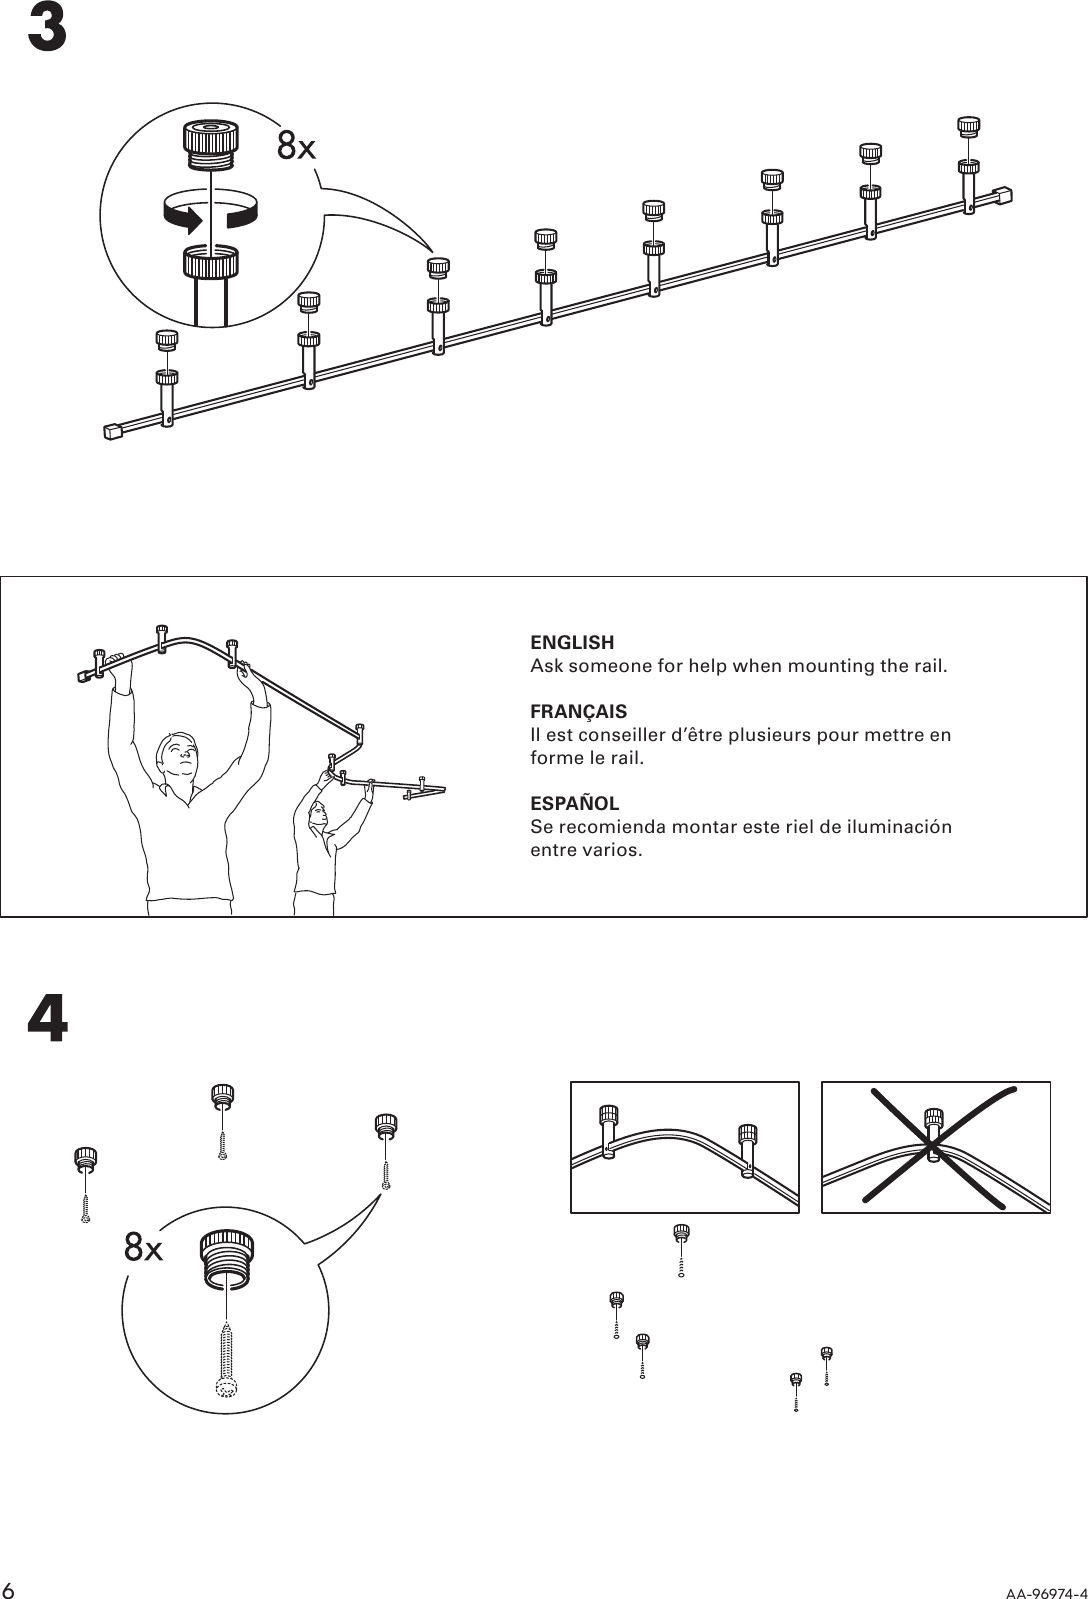 Page 6 of 12 - Ikea Ikea-Magnesium-Spotlight-System-Assembly-Instruction